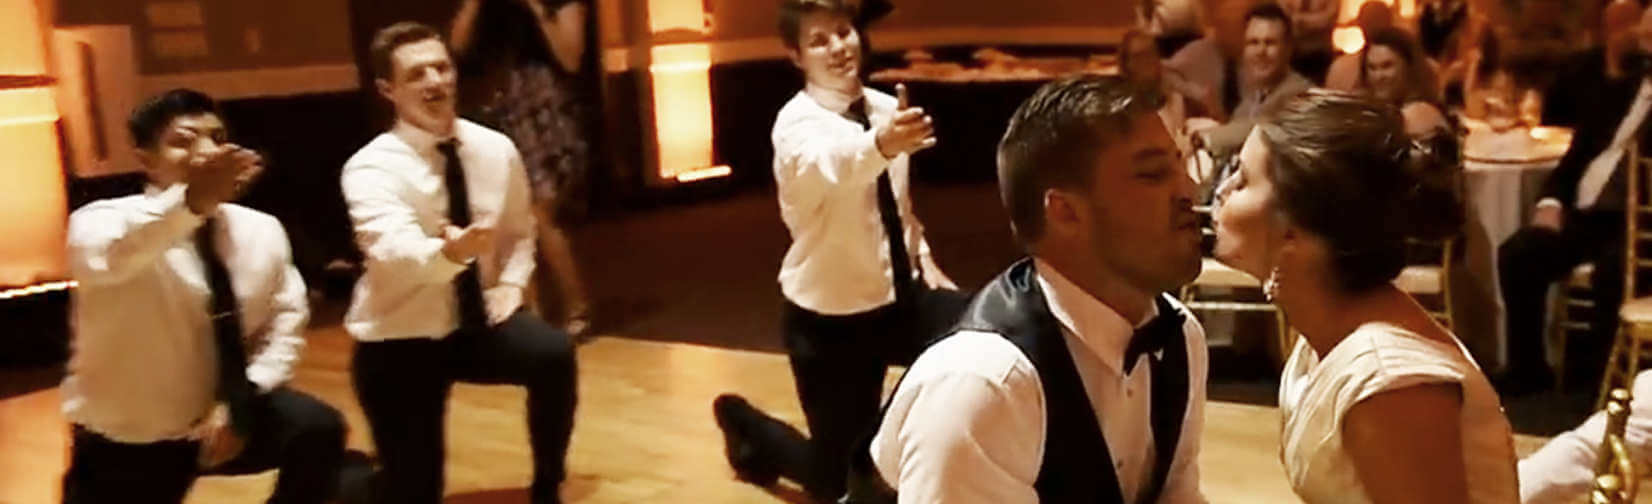 He and his groomsmen blew more than the Bride's mind